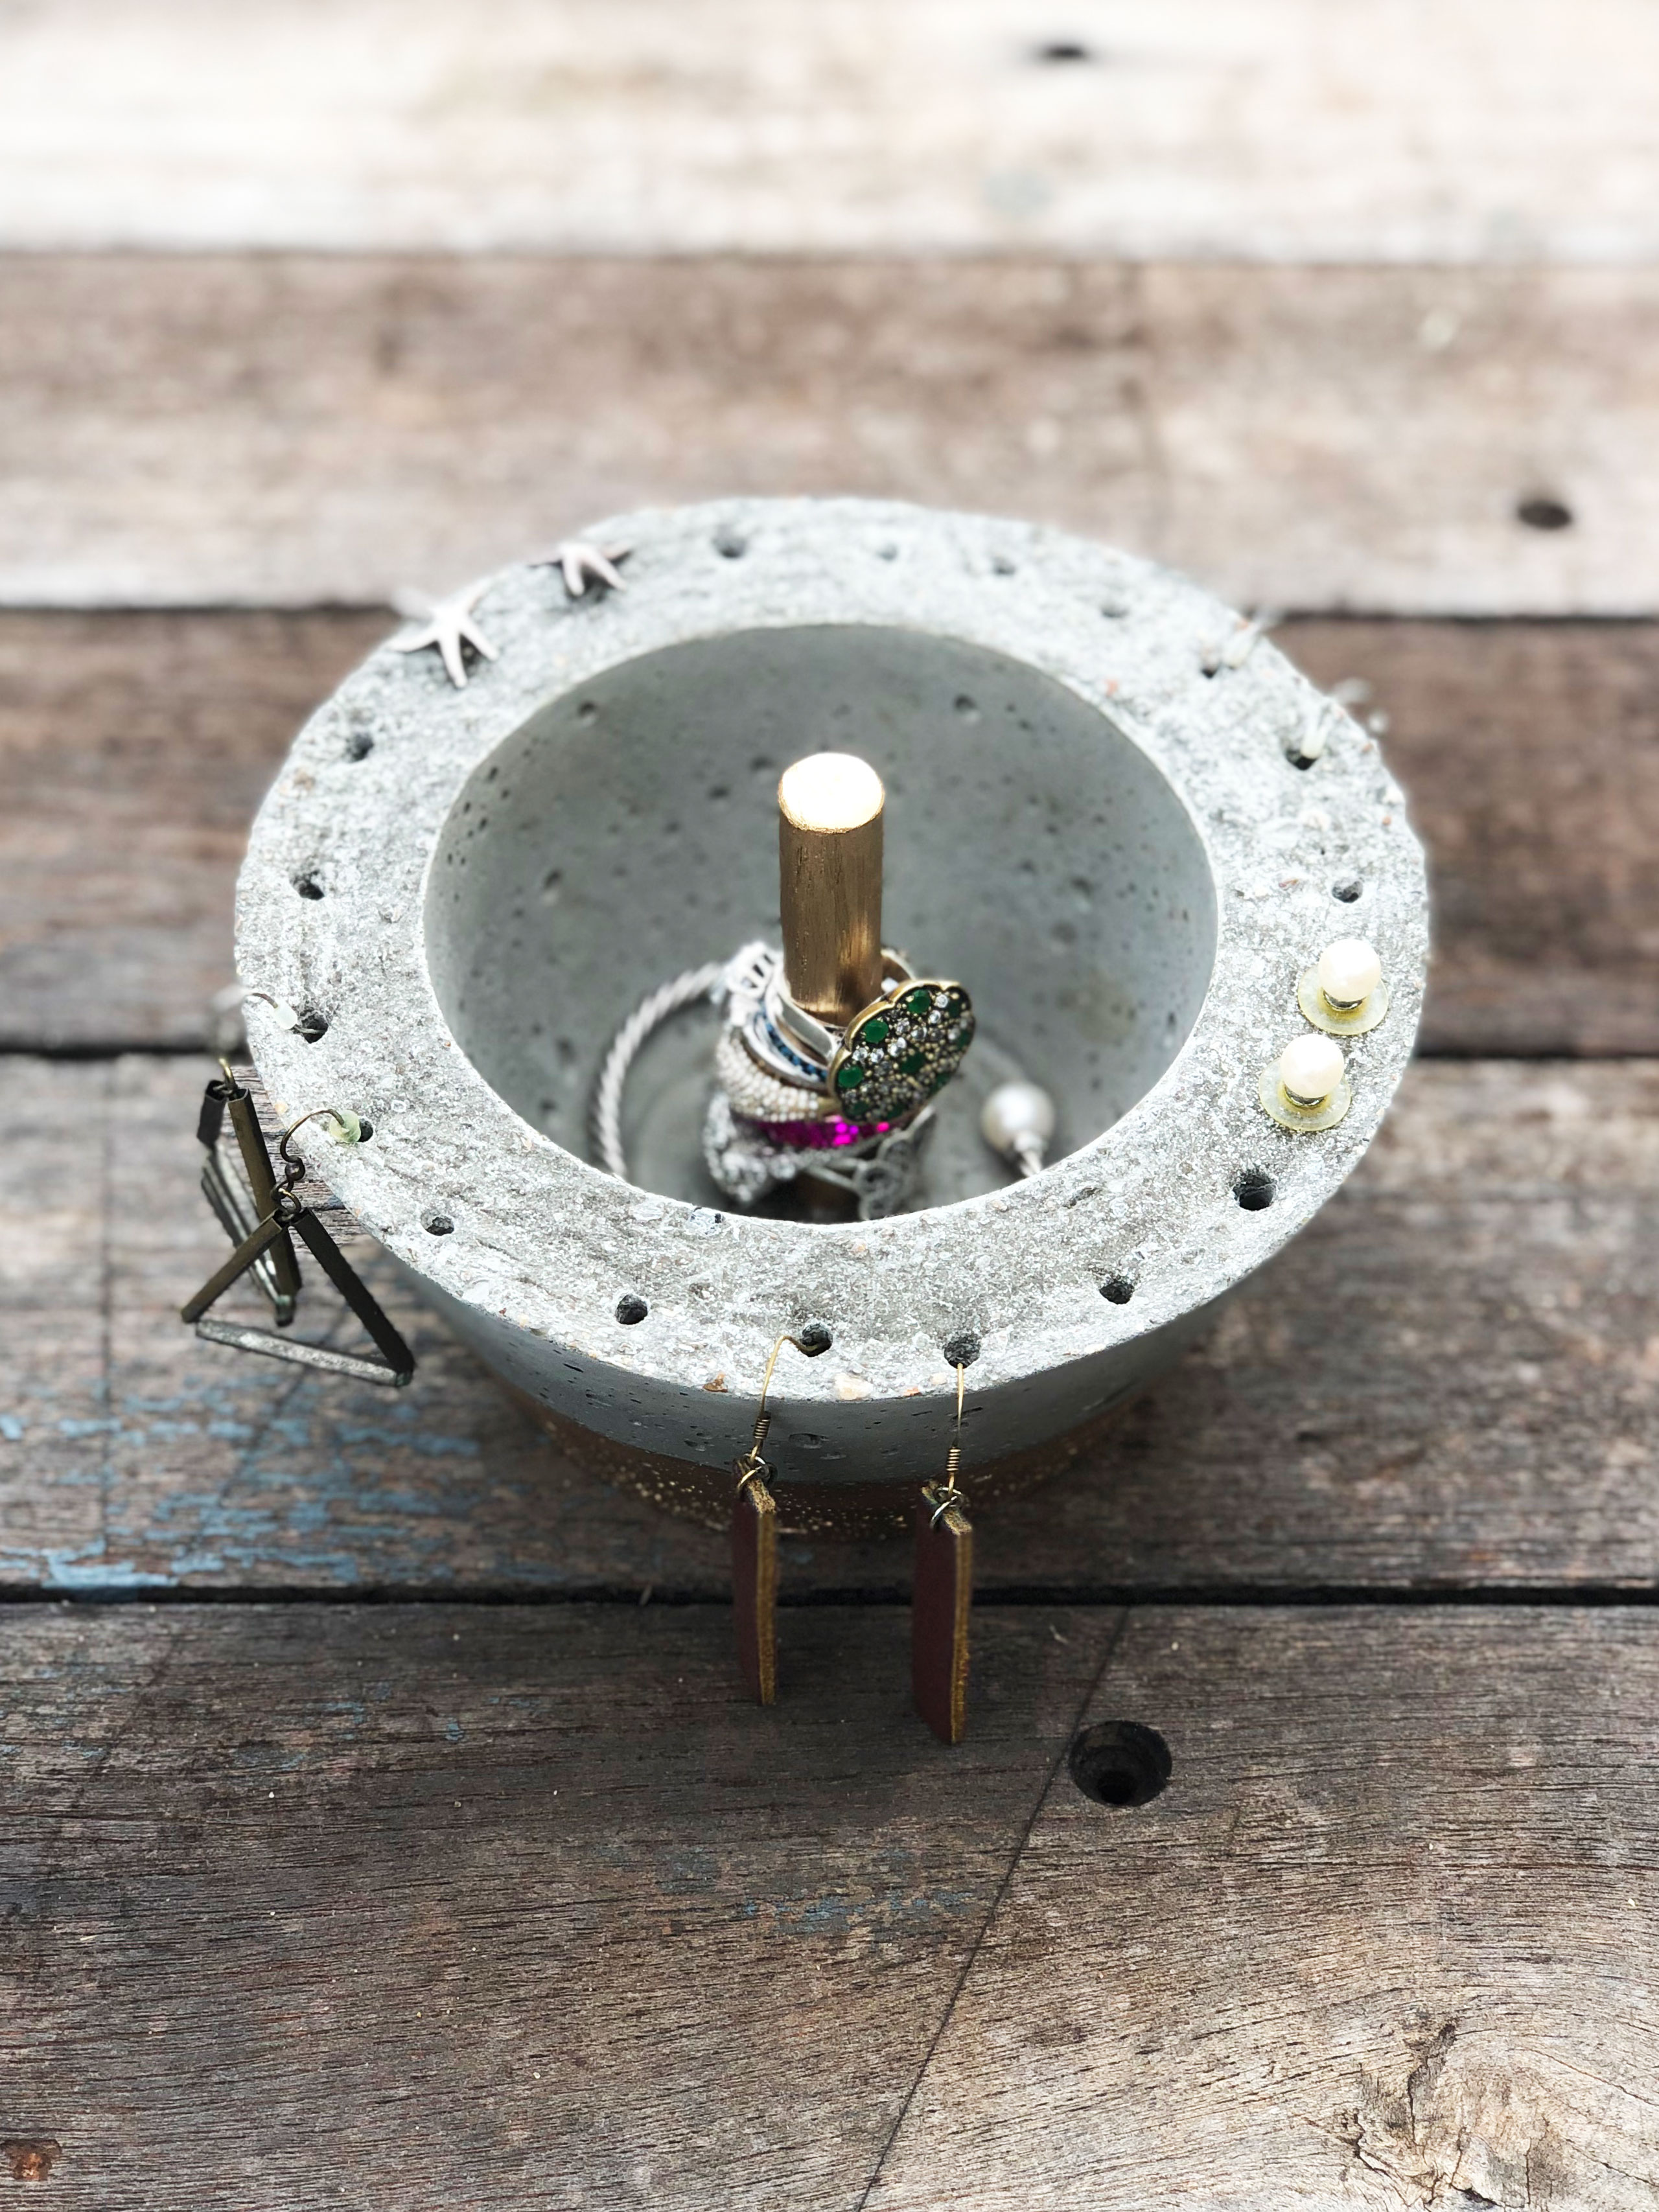 diy concrete bowl with ring holder in the center